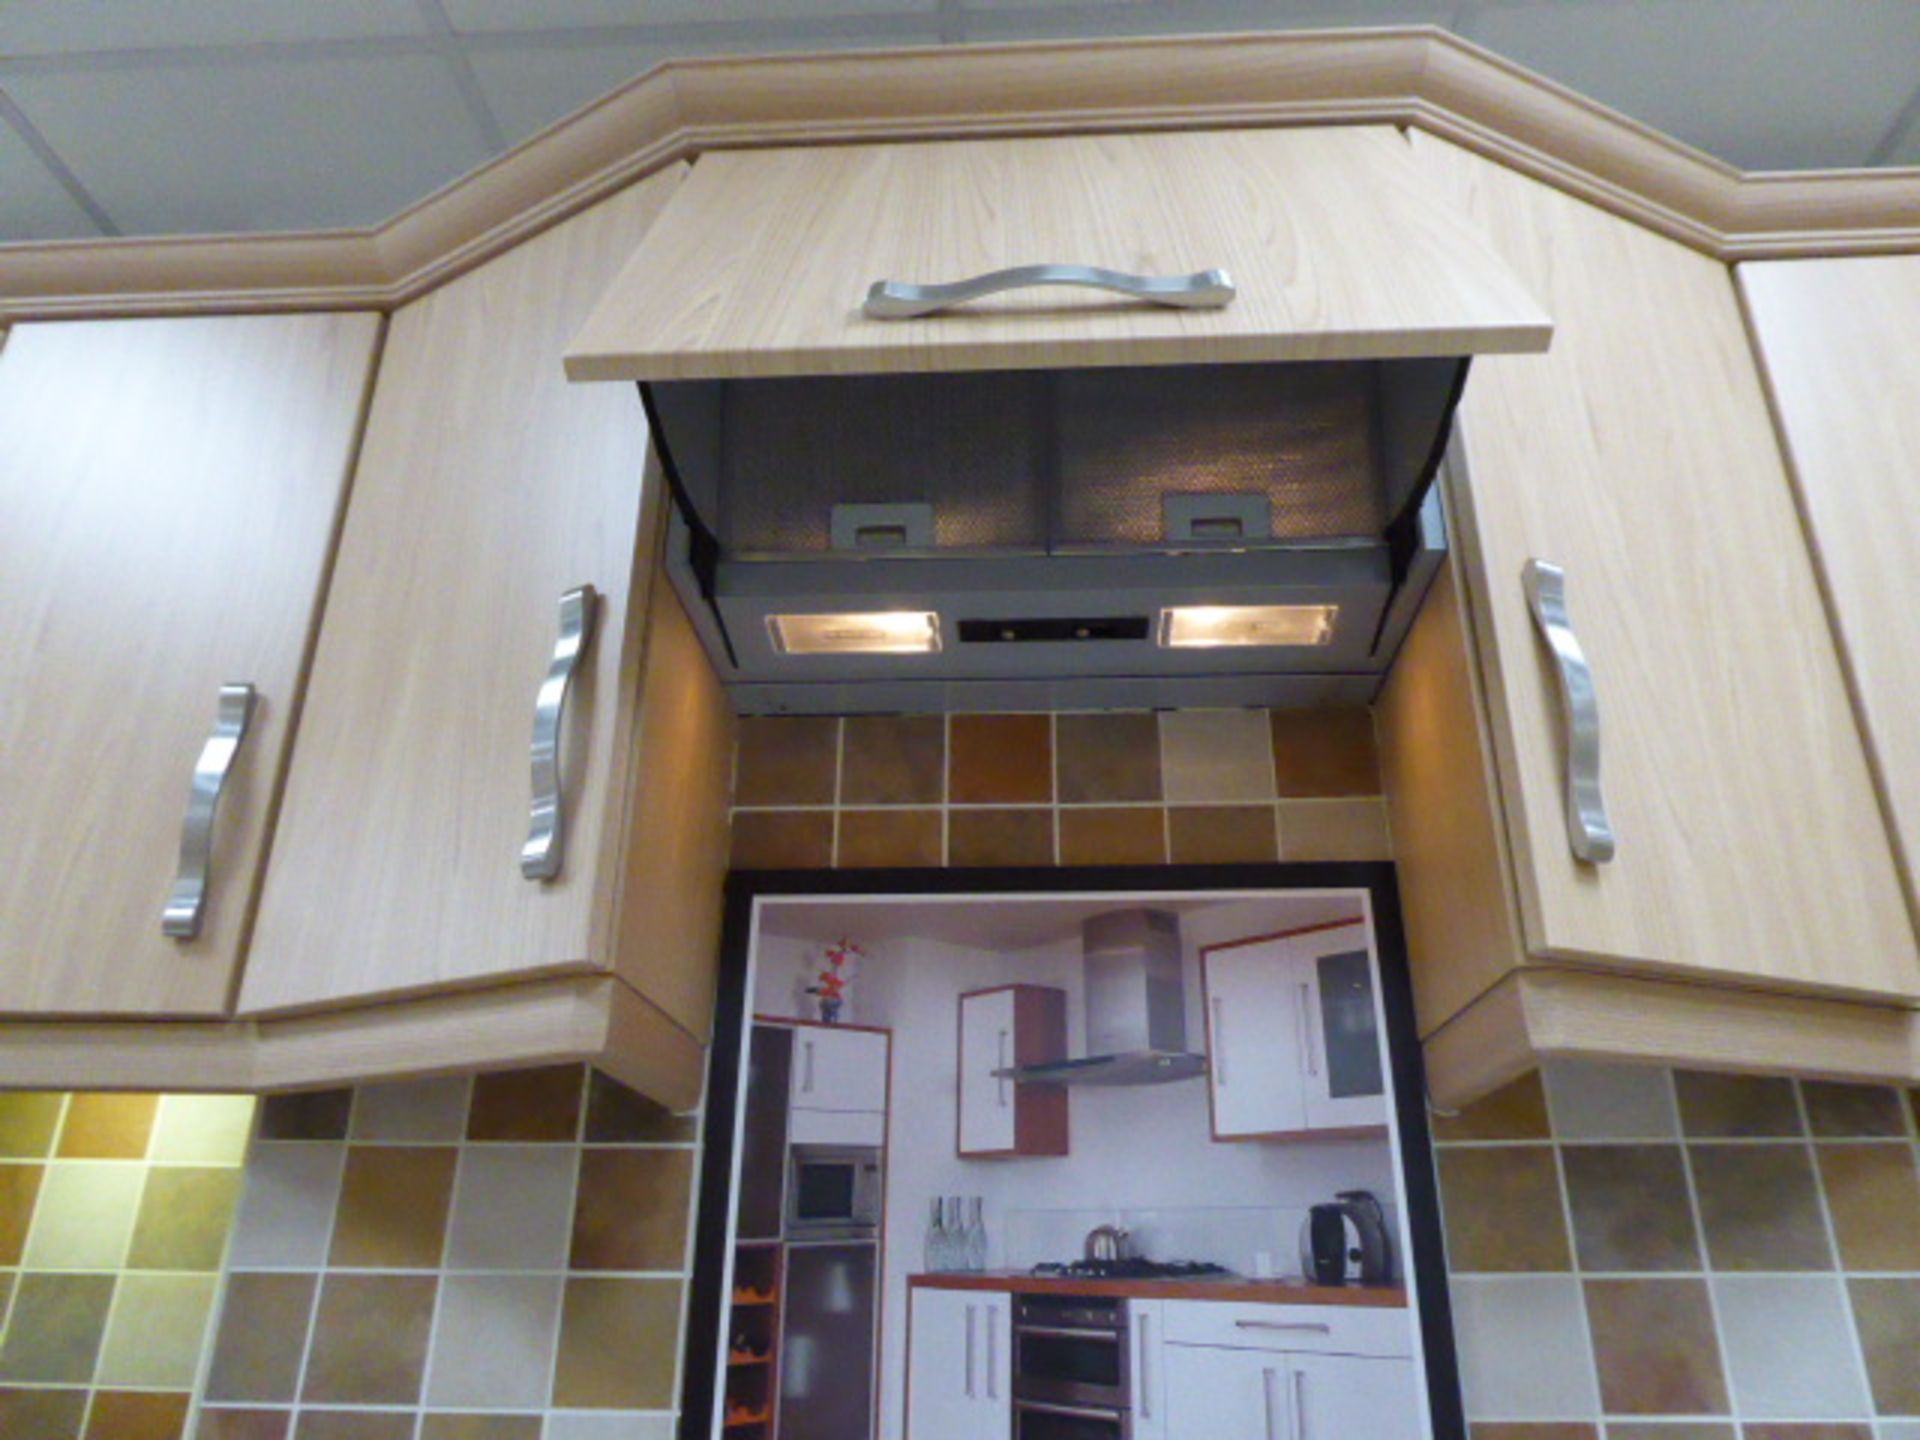 Alto Corsico chestnut L-shaped kitchen with stone effect laminate worktops. Max measurement is 345cm - Image 10 of 15